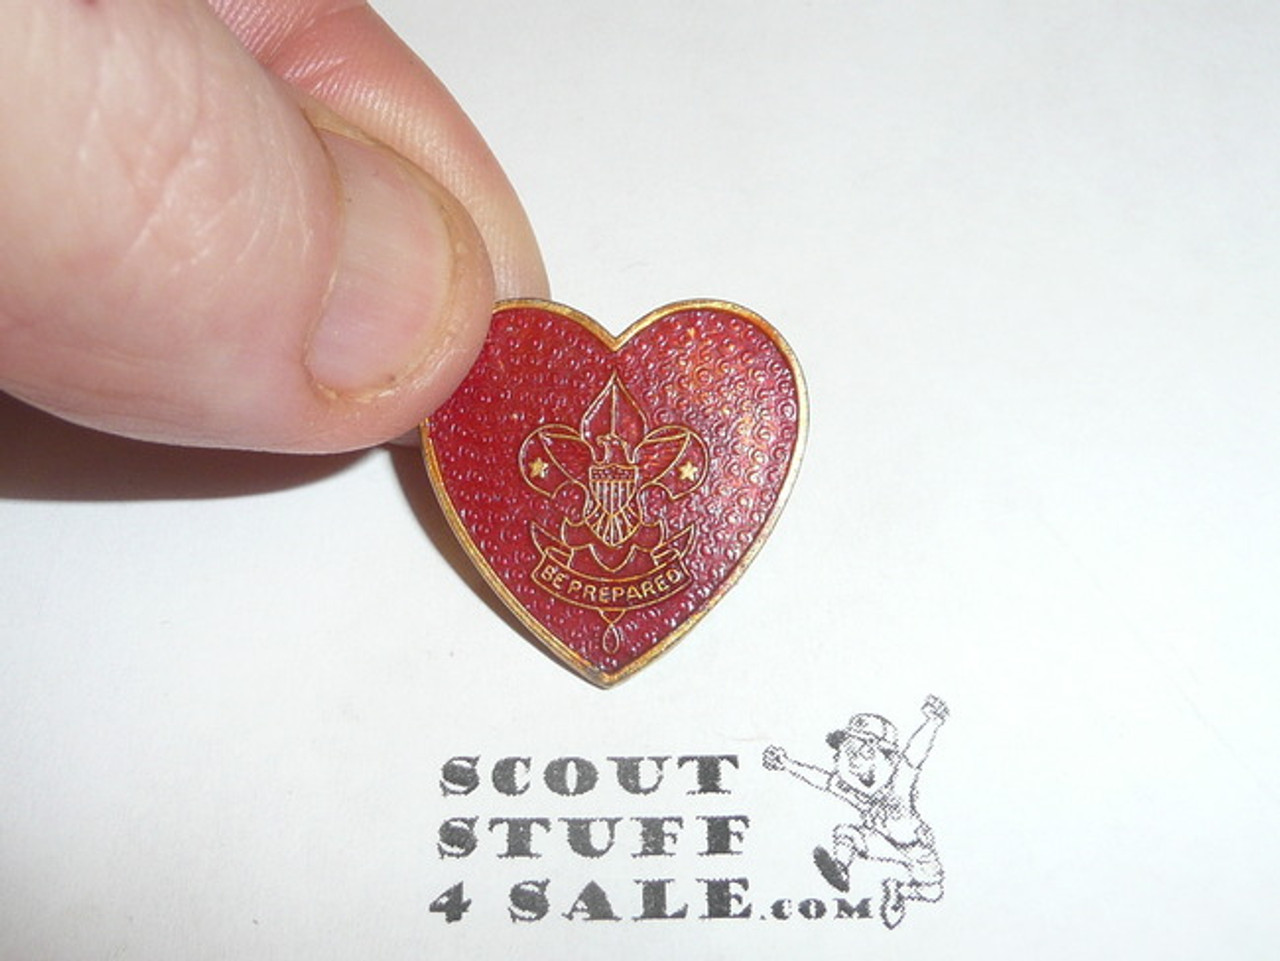 Life Scout Rank Pin, bent wire Clasp, 24mm Tall